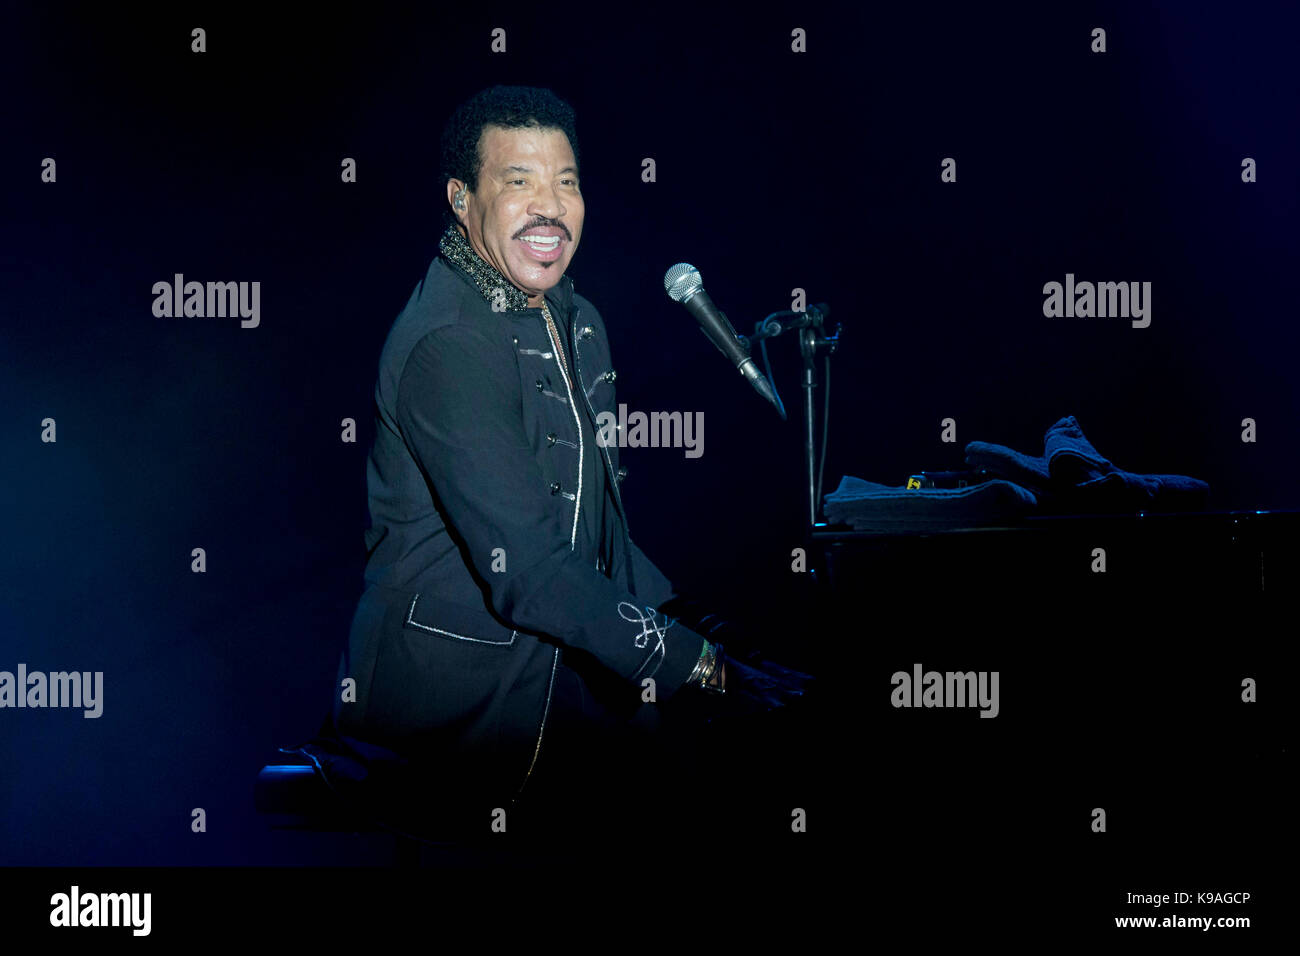 Singer Lionel Richie in concert at the Sporting concert hall in Monaco